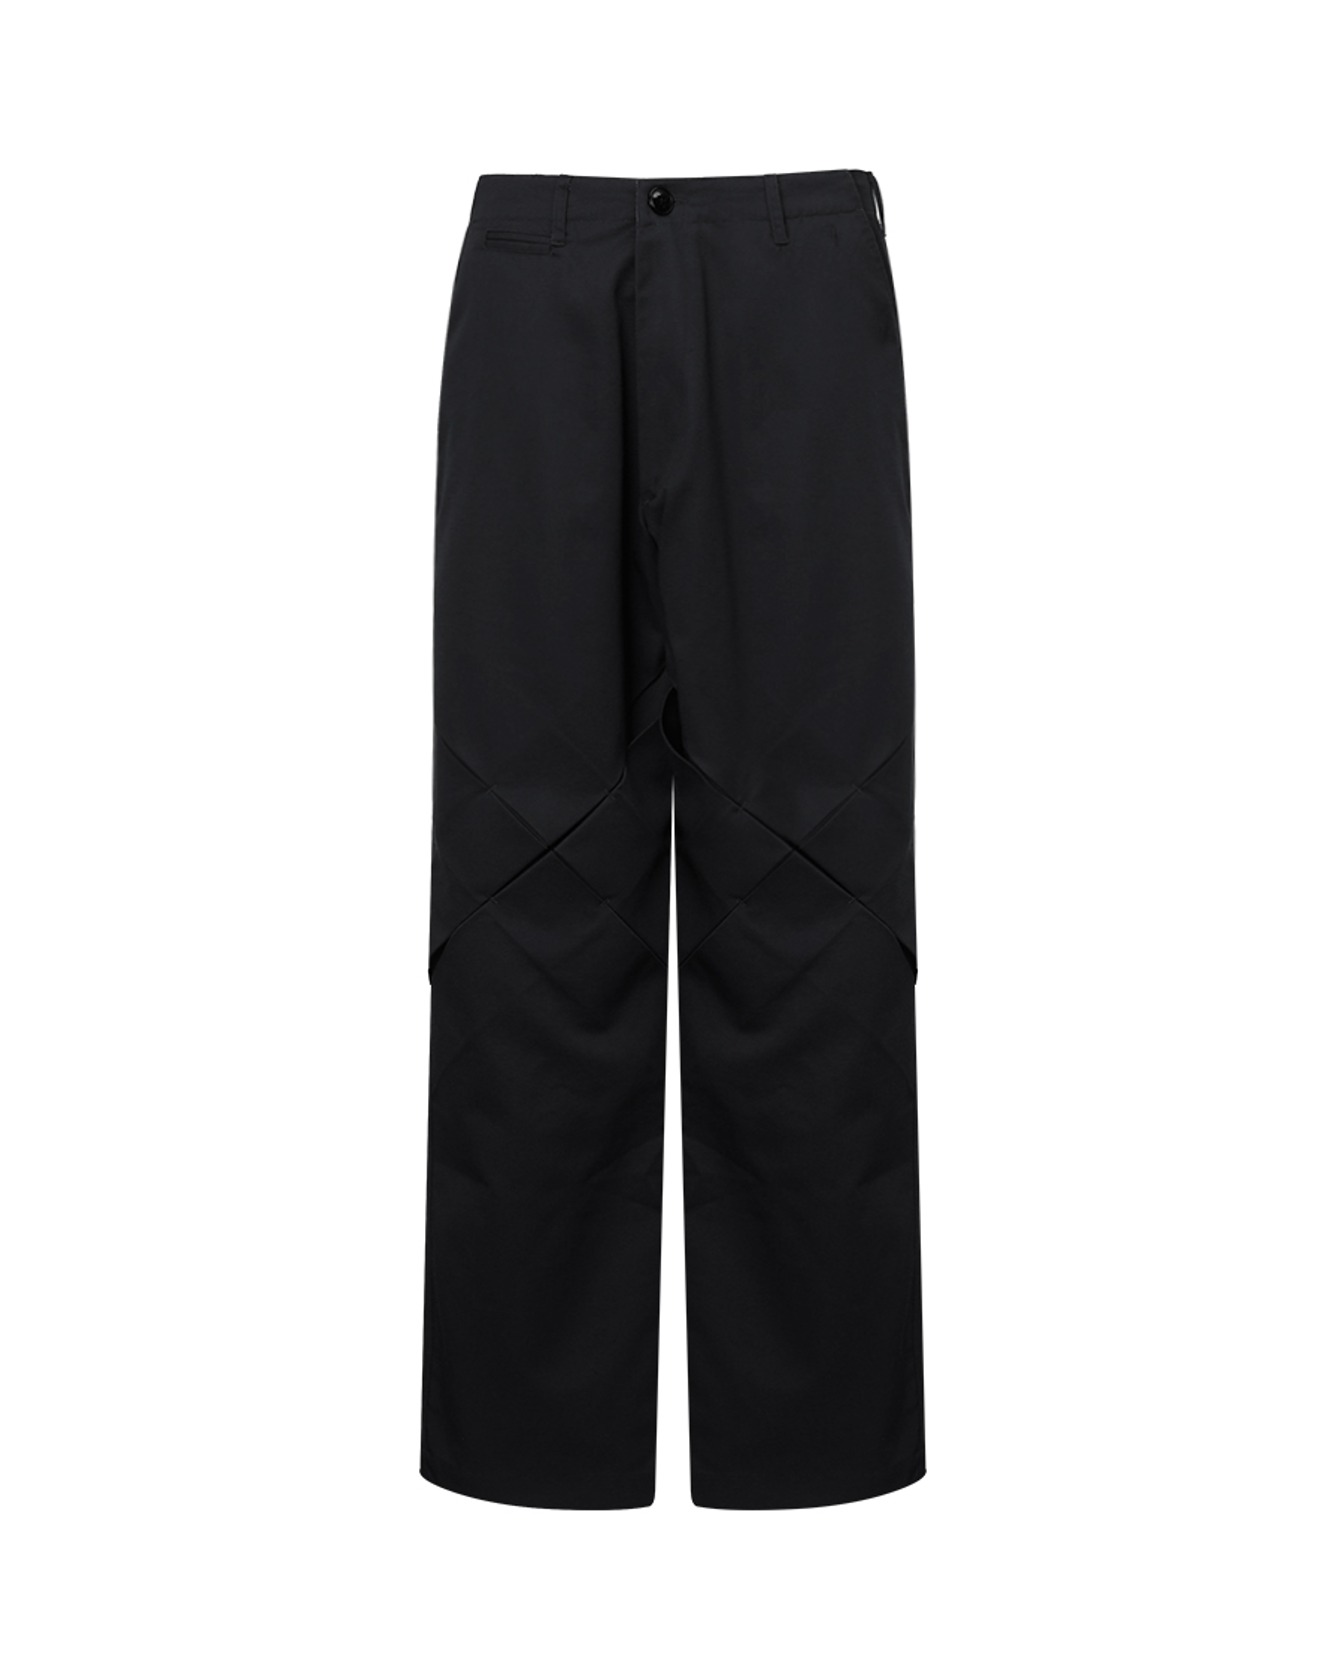 X FRENCH TROUSERS(wached black)